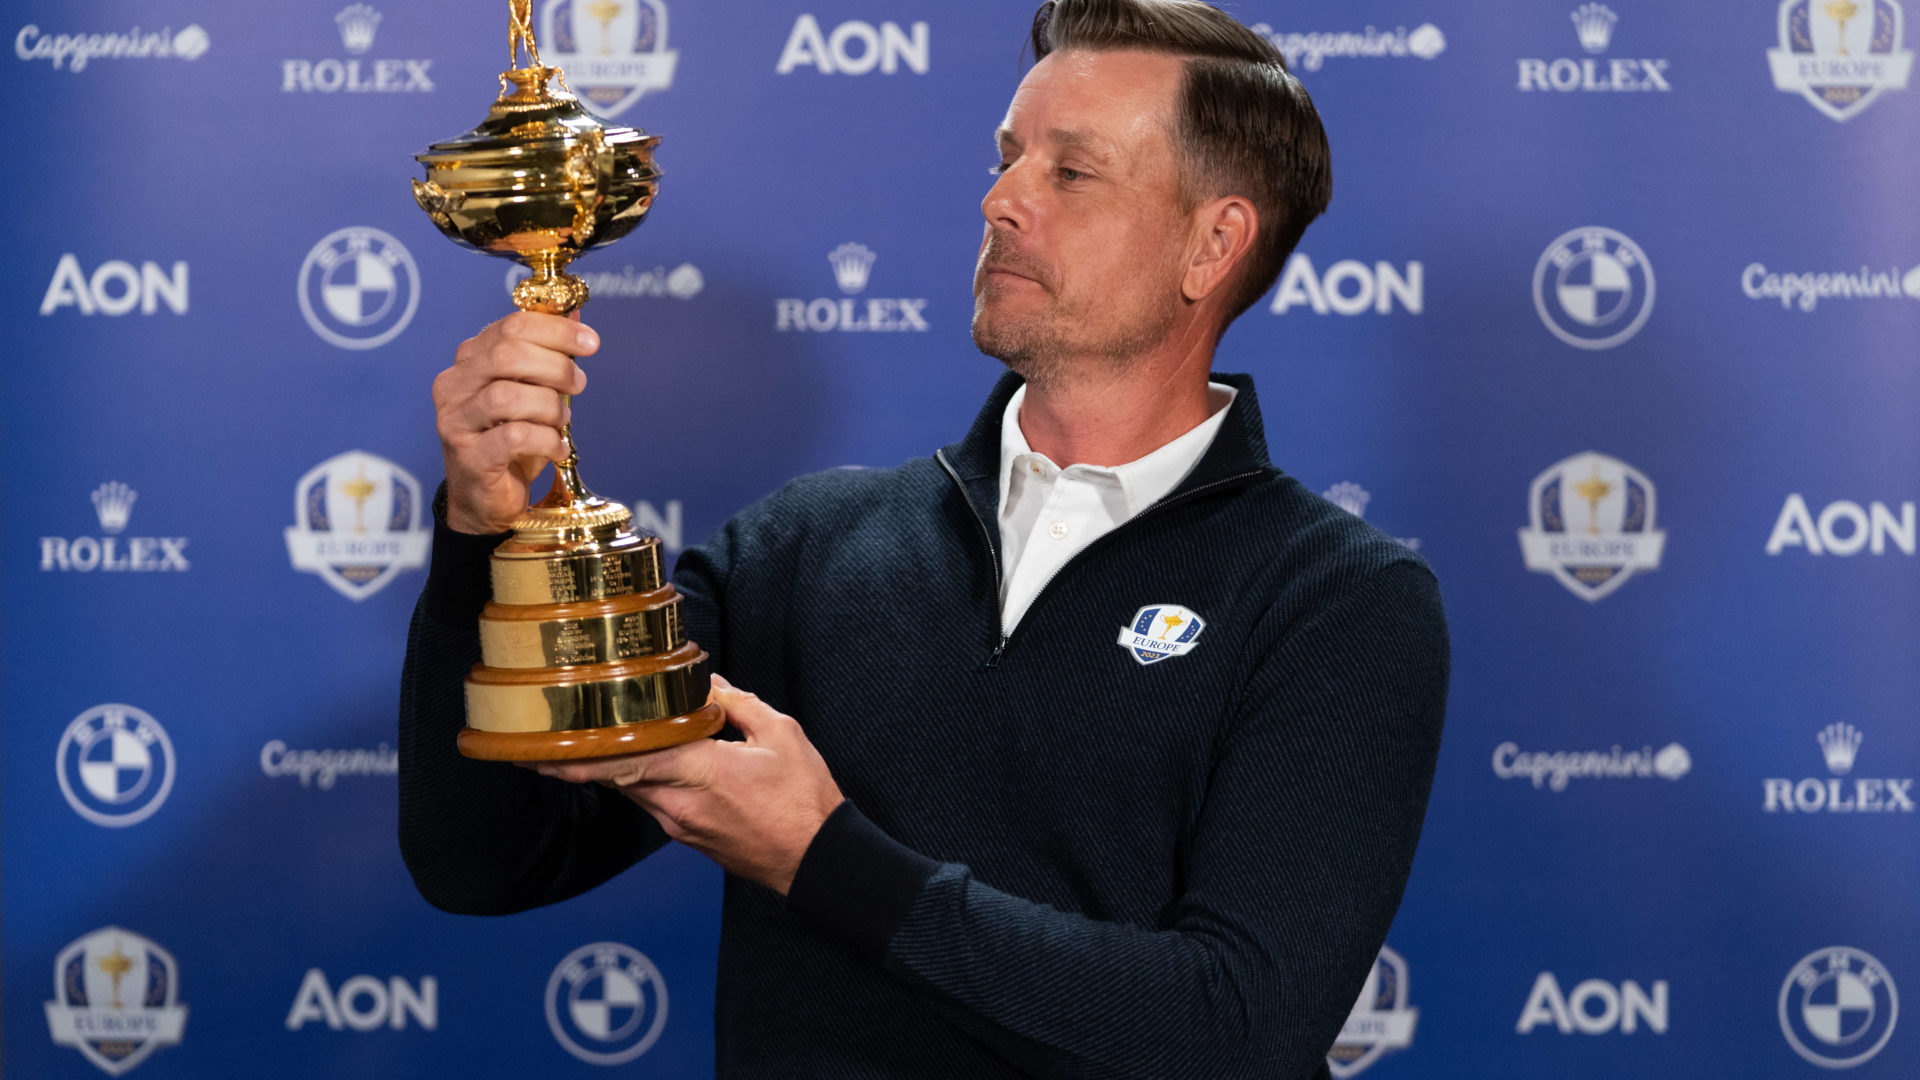 ORLANDO, FLORIDA - MARCH 15: 2023 European Ryder Cup Captain Henrik Stenson of Sweden poses for a portrait on March 15, 2022 in Orlando, Florida. (Photo by Hailey Garrett/Getty Images)